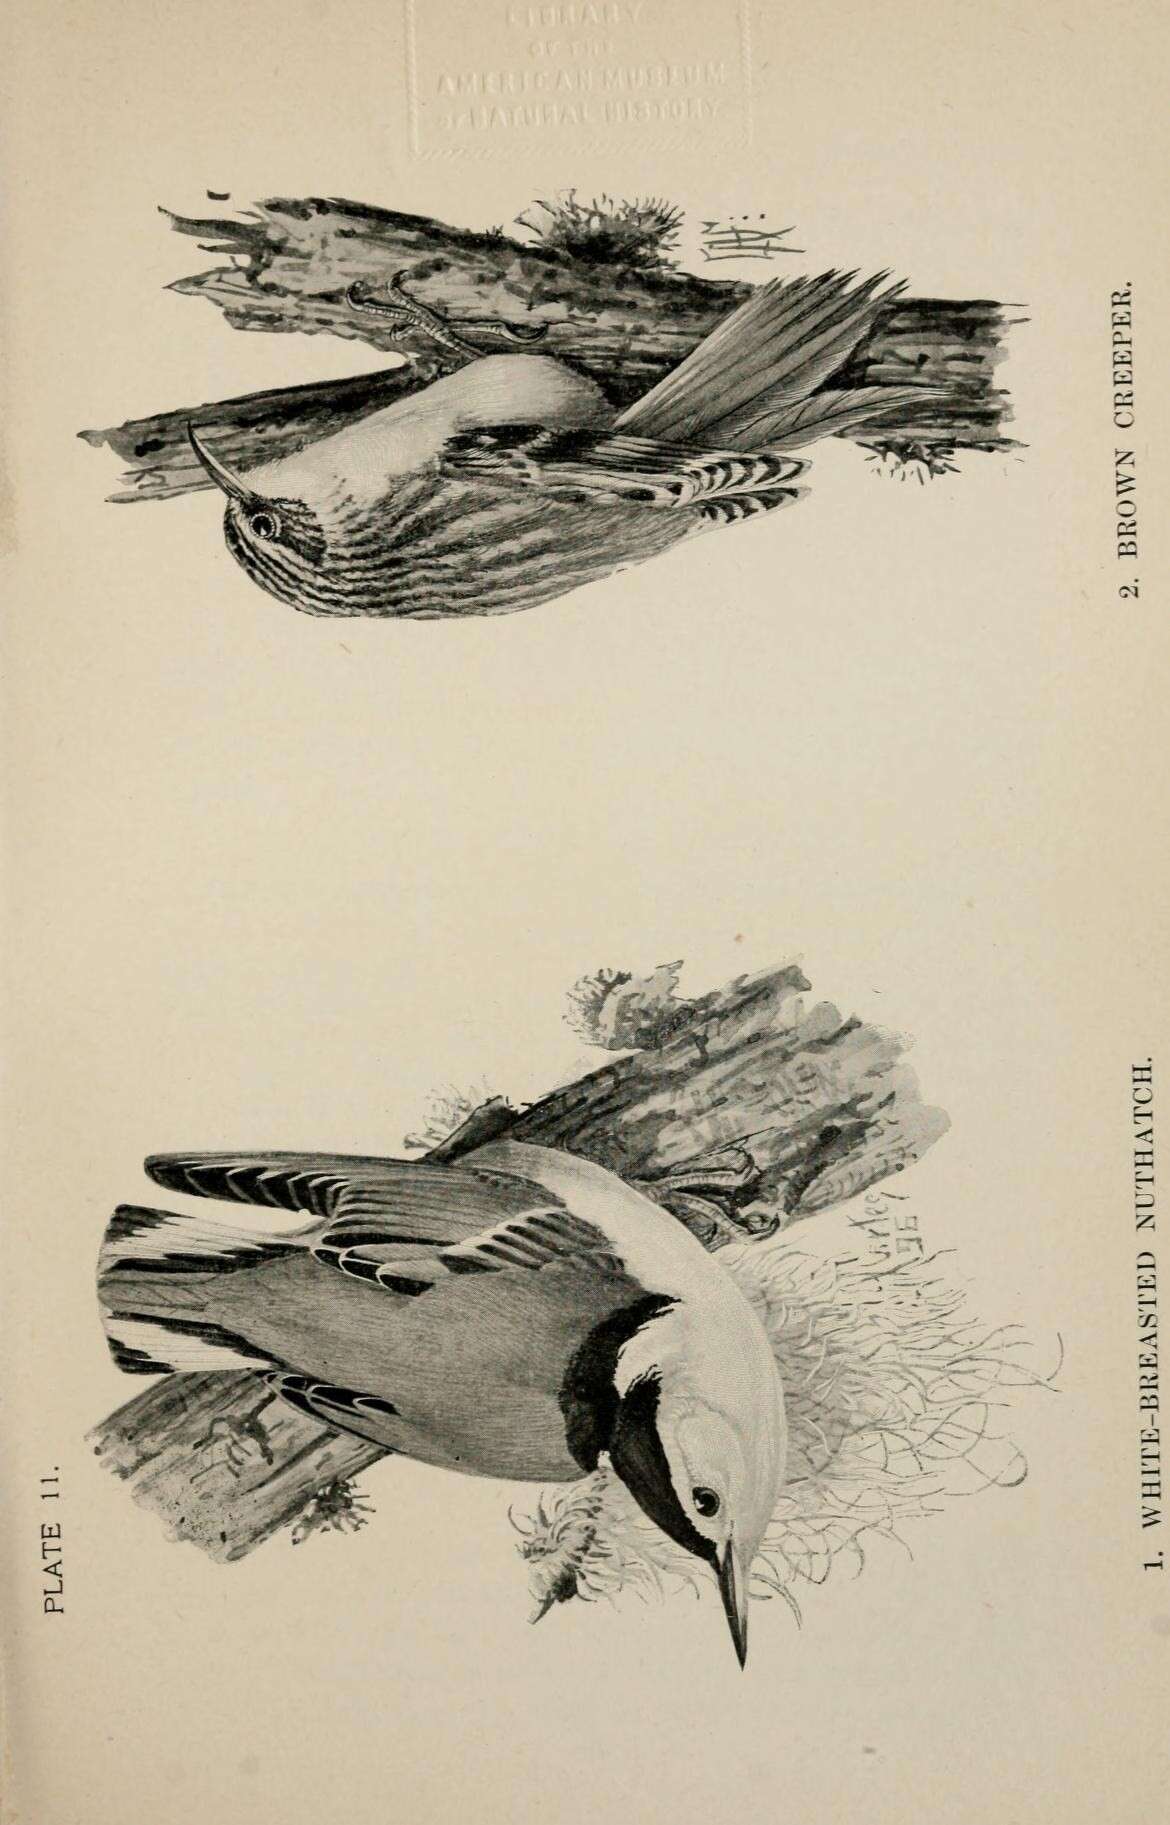 Image of White-breasted Nuthatch